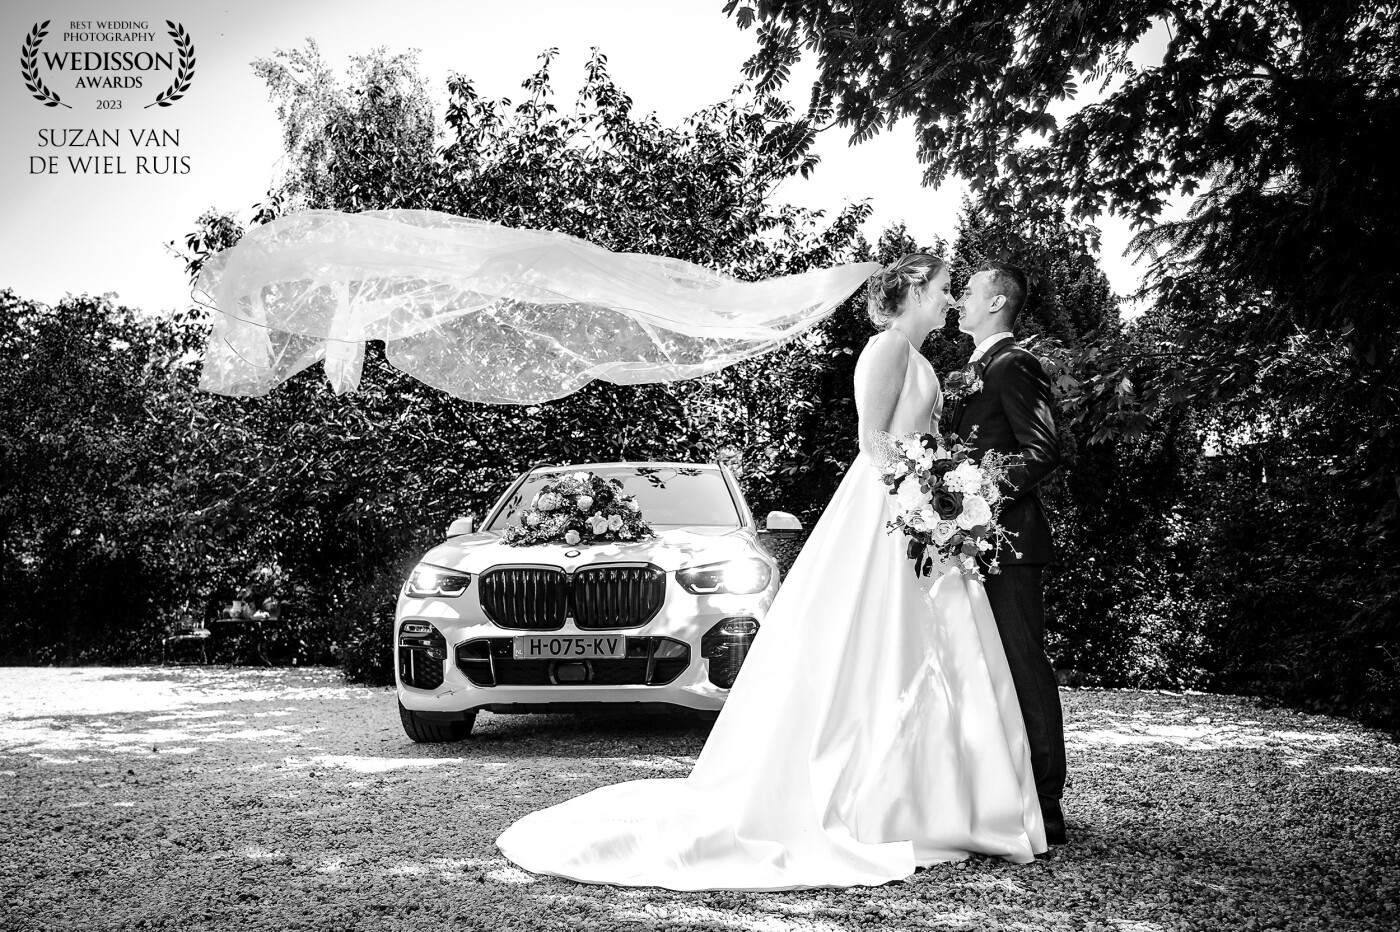 Showing off the veil and the car :)